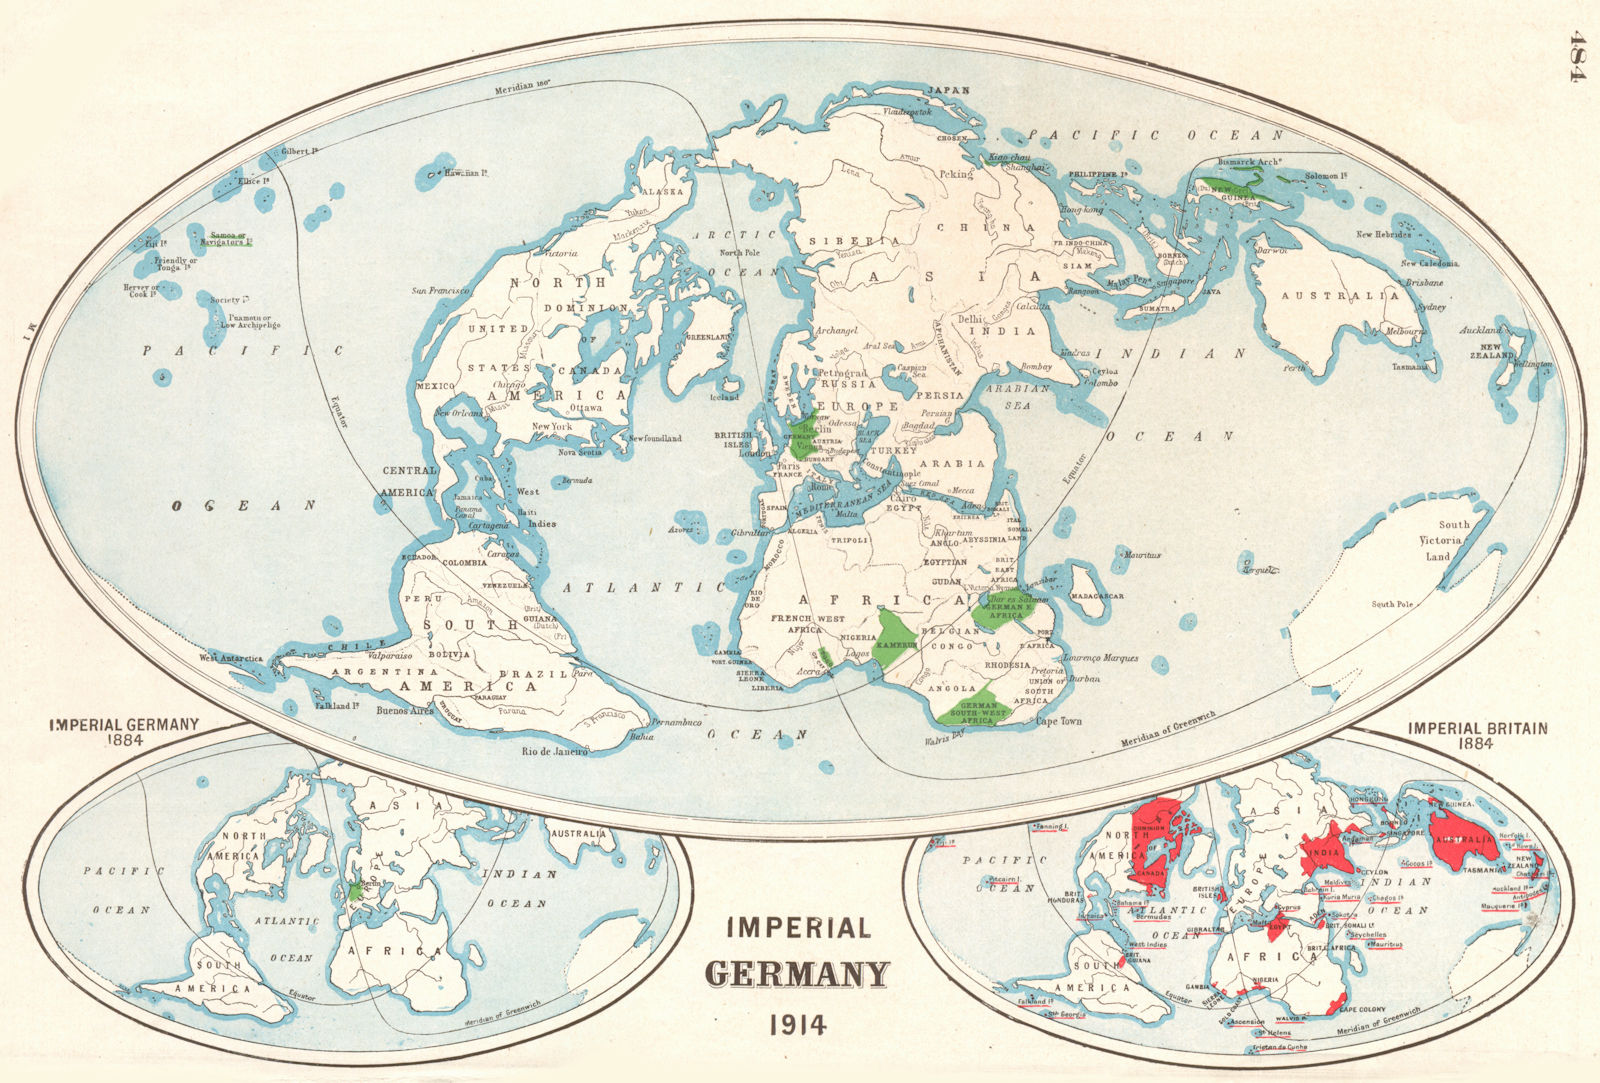 GERMAN EMPIRE. Shown in 1884 & 1914. British Empire in 1884. Imperial 1920 map